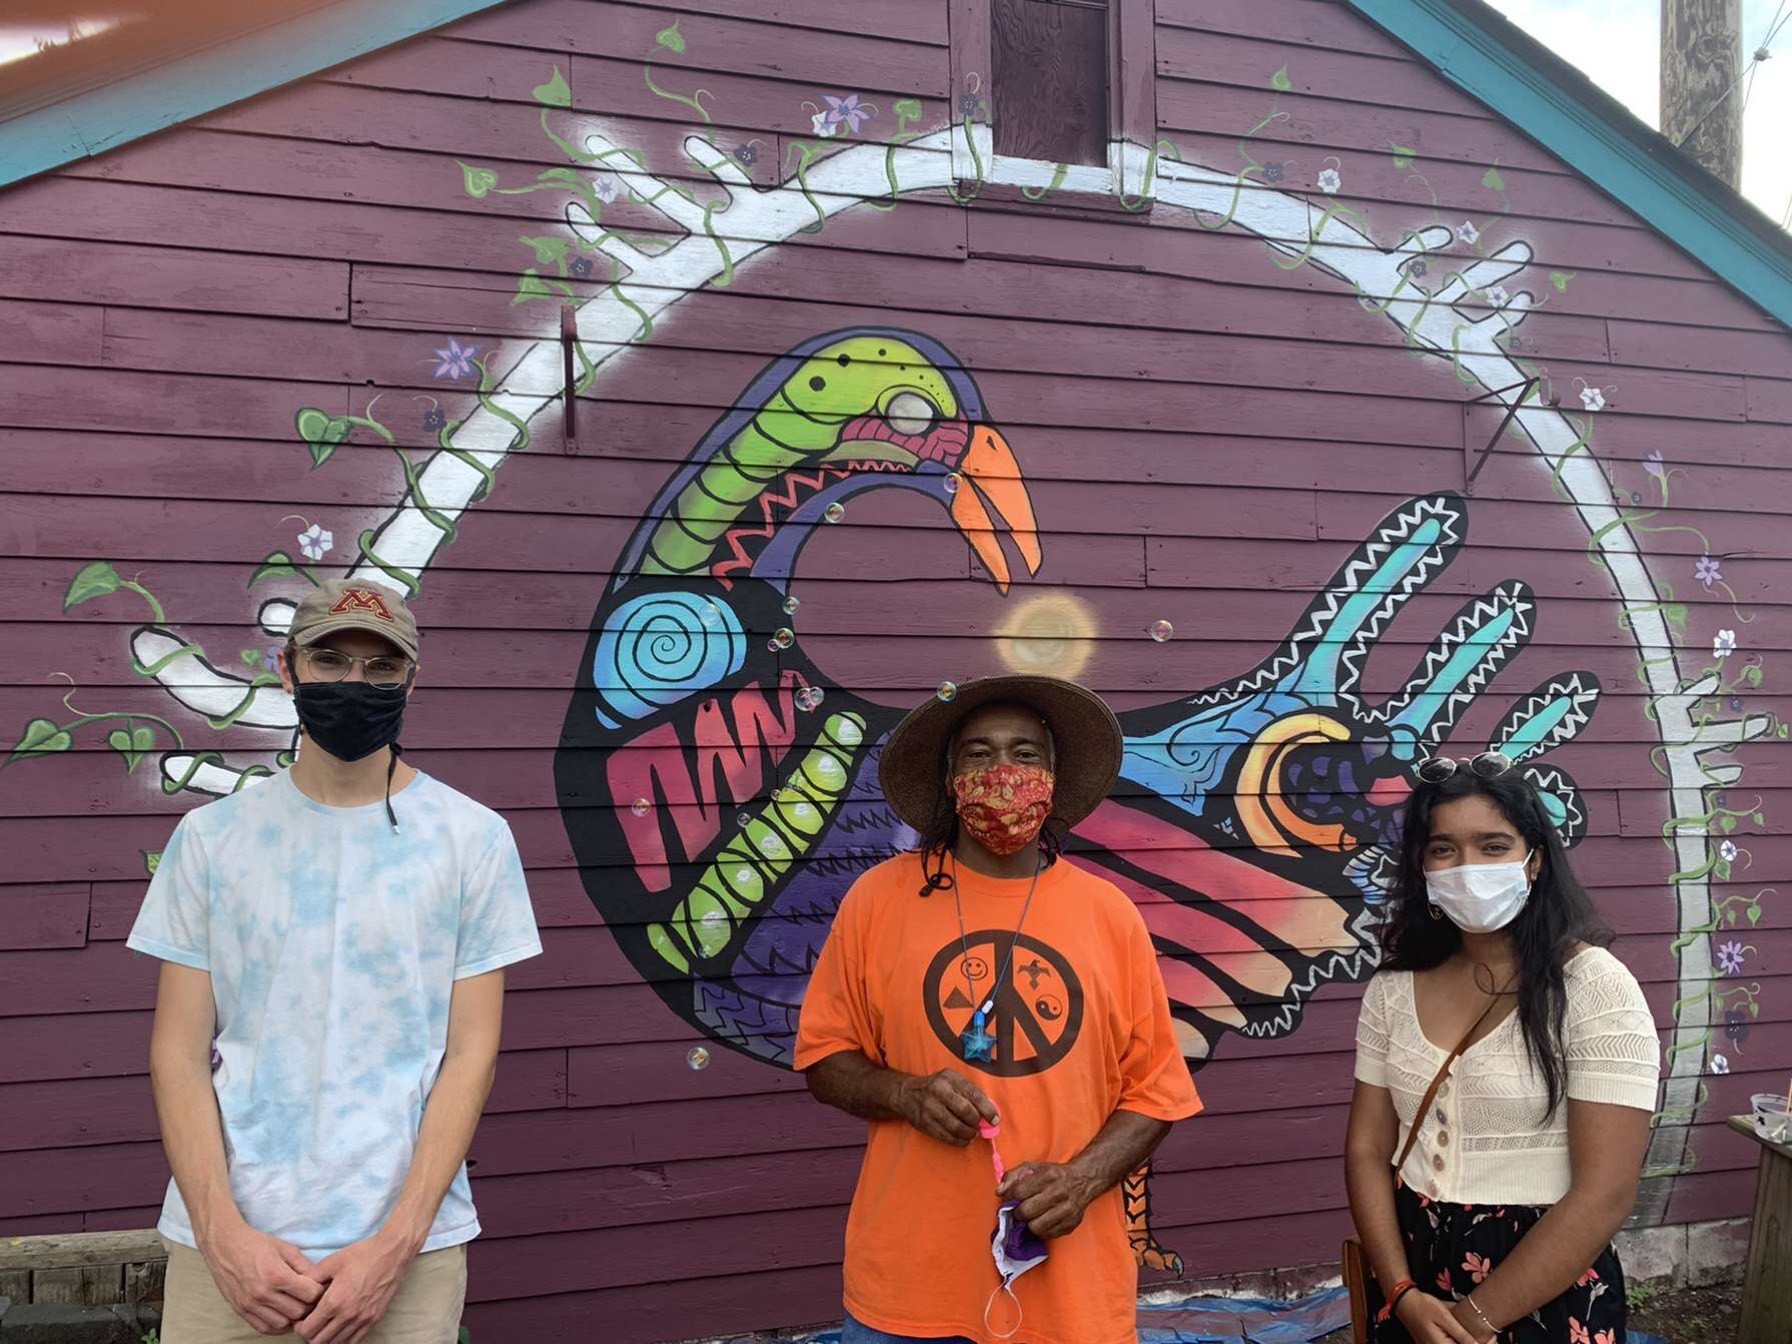 Robert Glisky, Melvin Giles and Sneha Sinha stand in front of a mural in the Peace Garden in the St. Anthony neighborhood of St. Paul. (Photo courtesy of Engineers Without Borders)